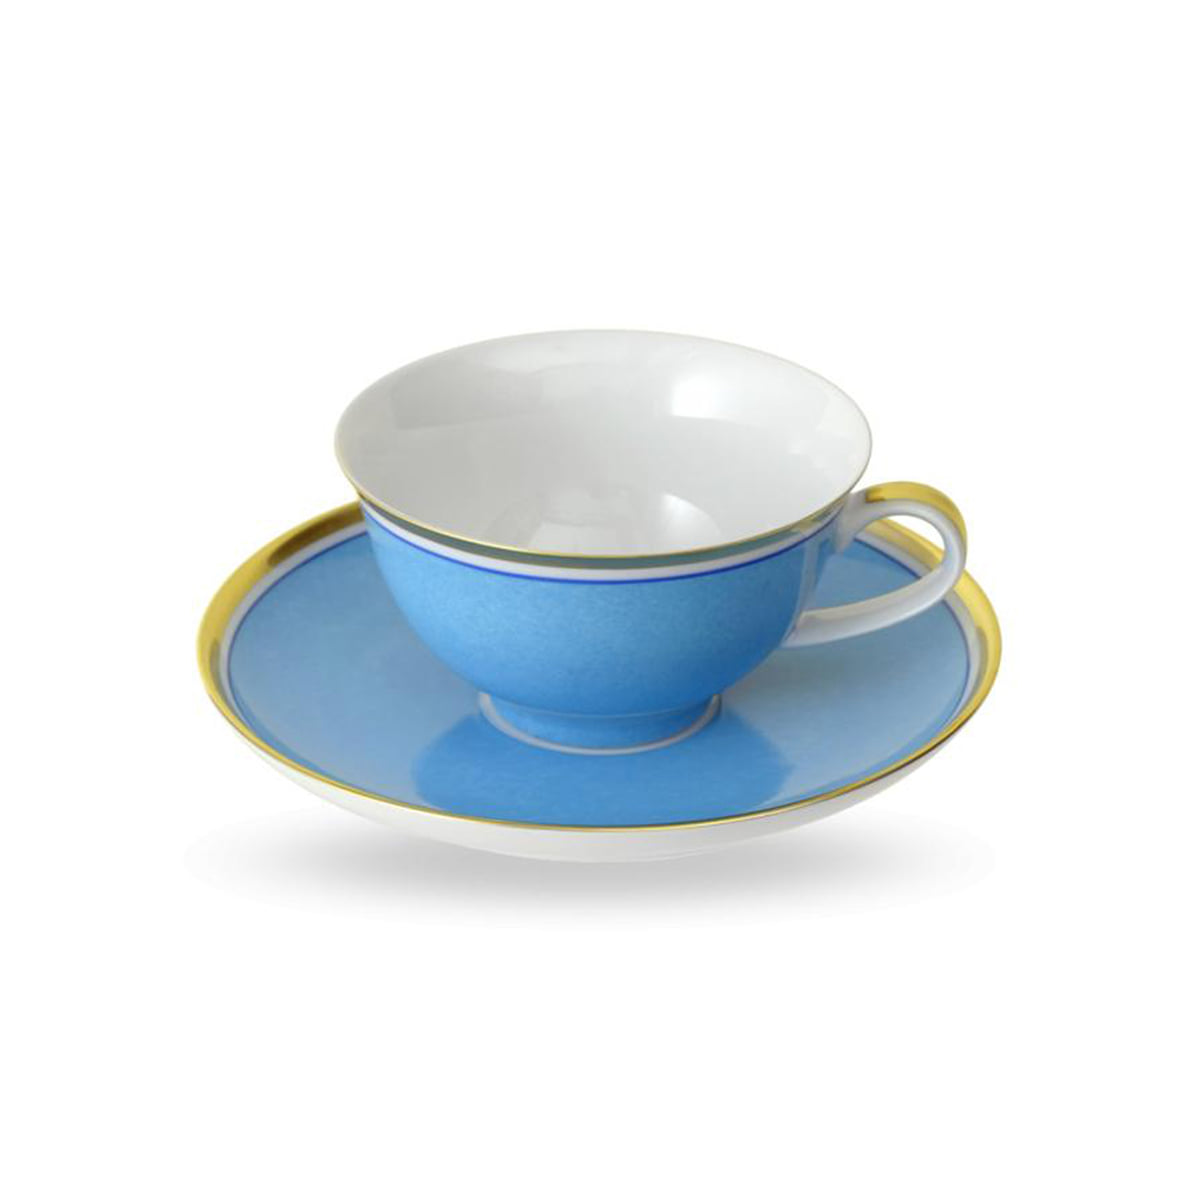 REICHENBACHColor Tea Cup 리첸바흐 컬러 티컵 (블루)MADE  IN  GERMANY